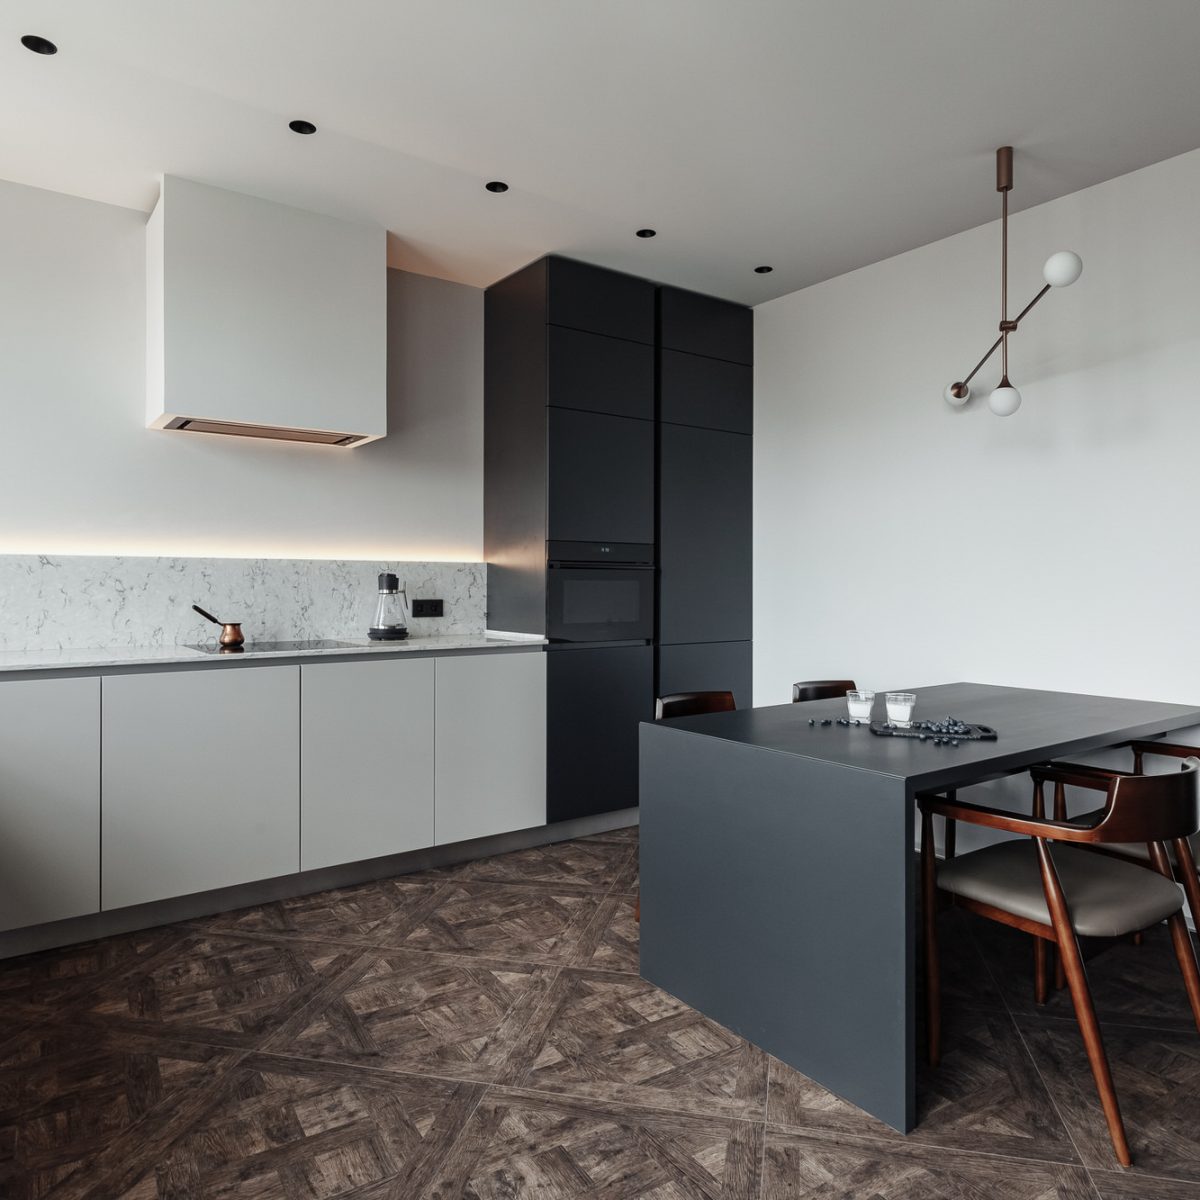 bright kitchen with dark table, convenient location of kitchen accessories and equipment, modern style, White walls, marble working surface and parquet floor.